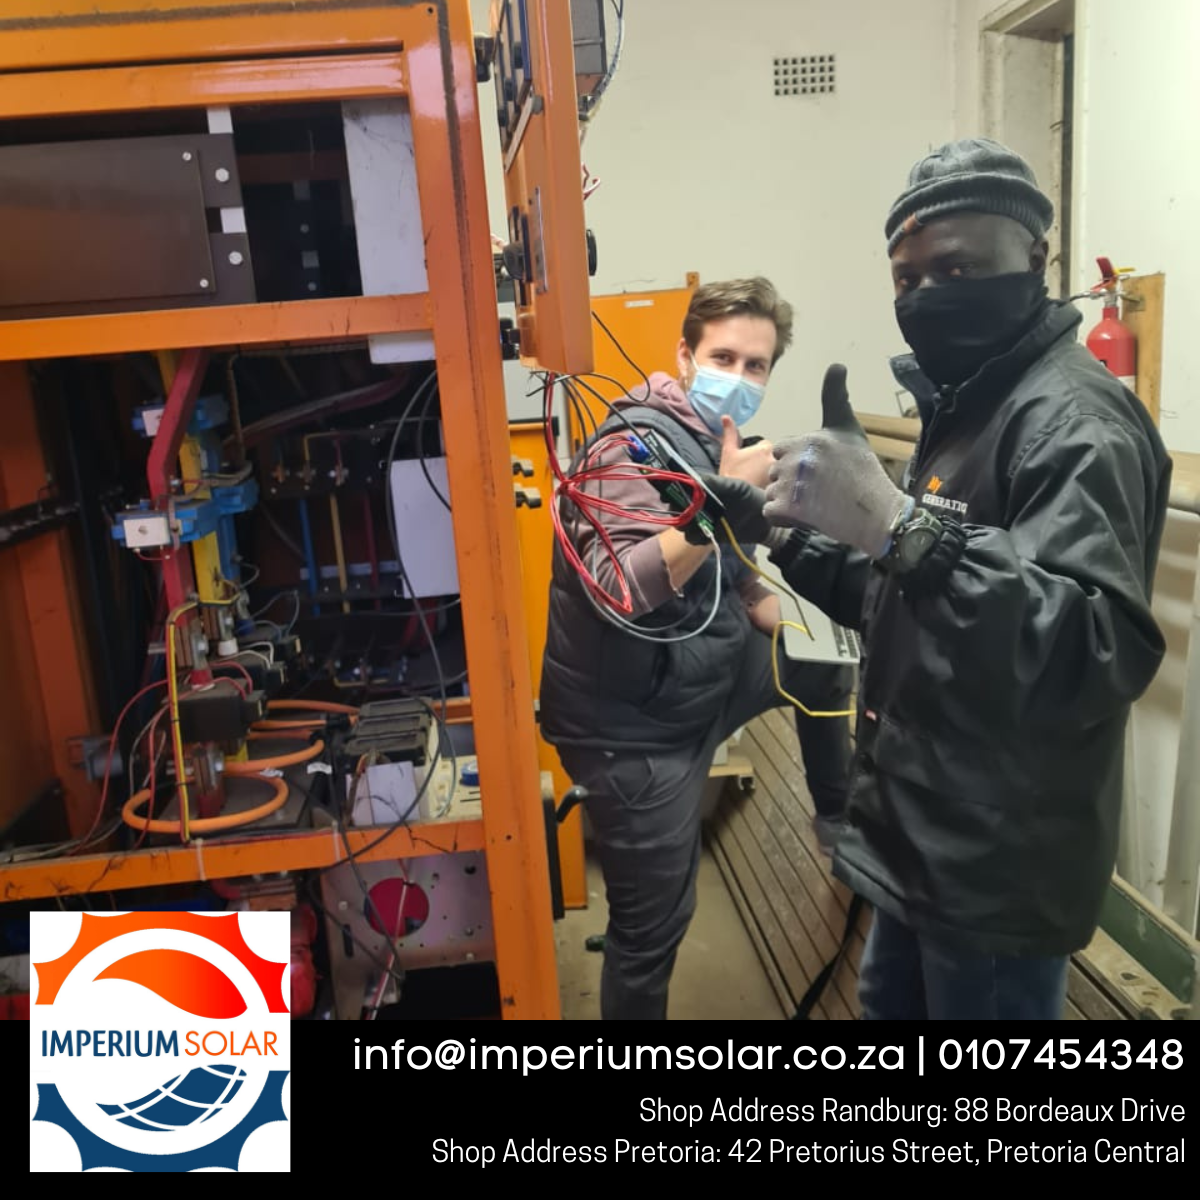 Our specialist electrical team